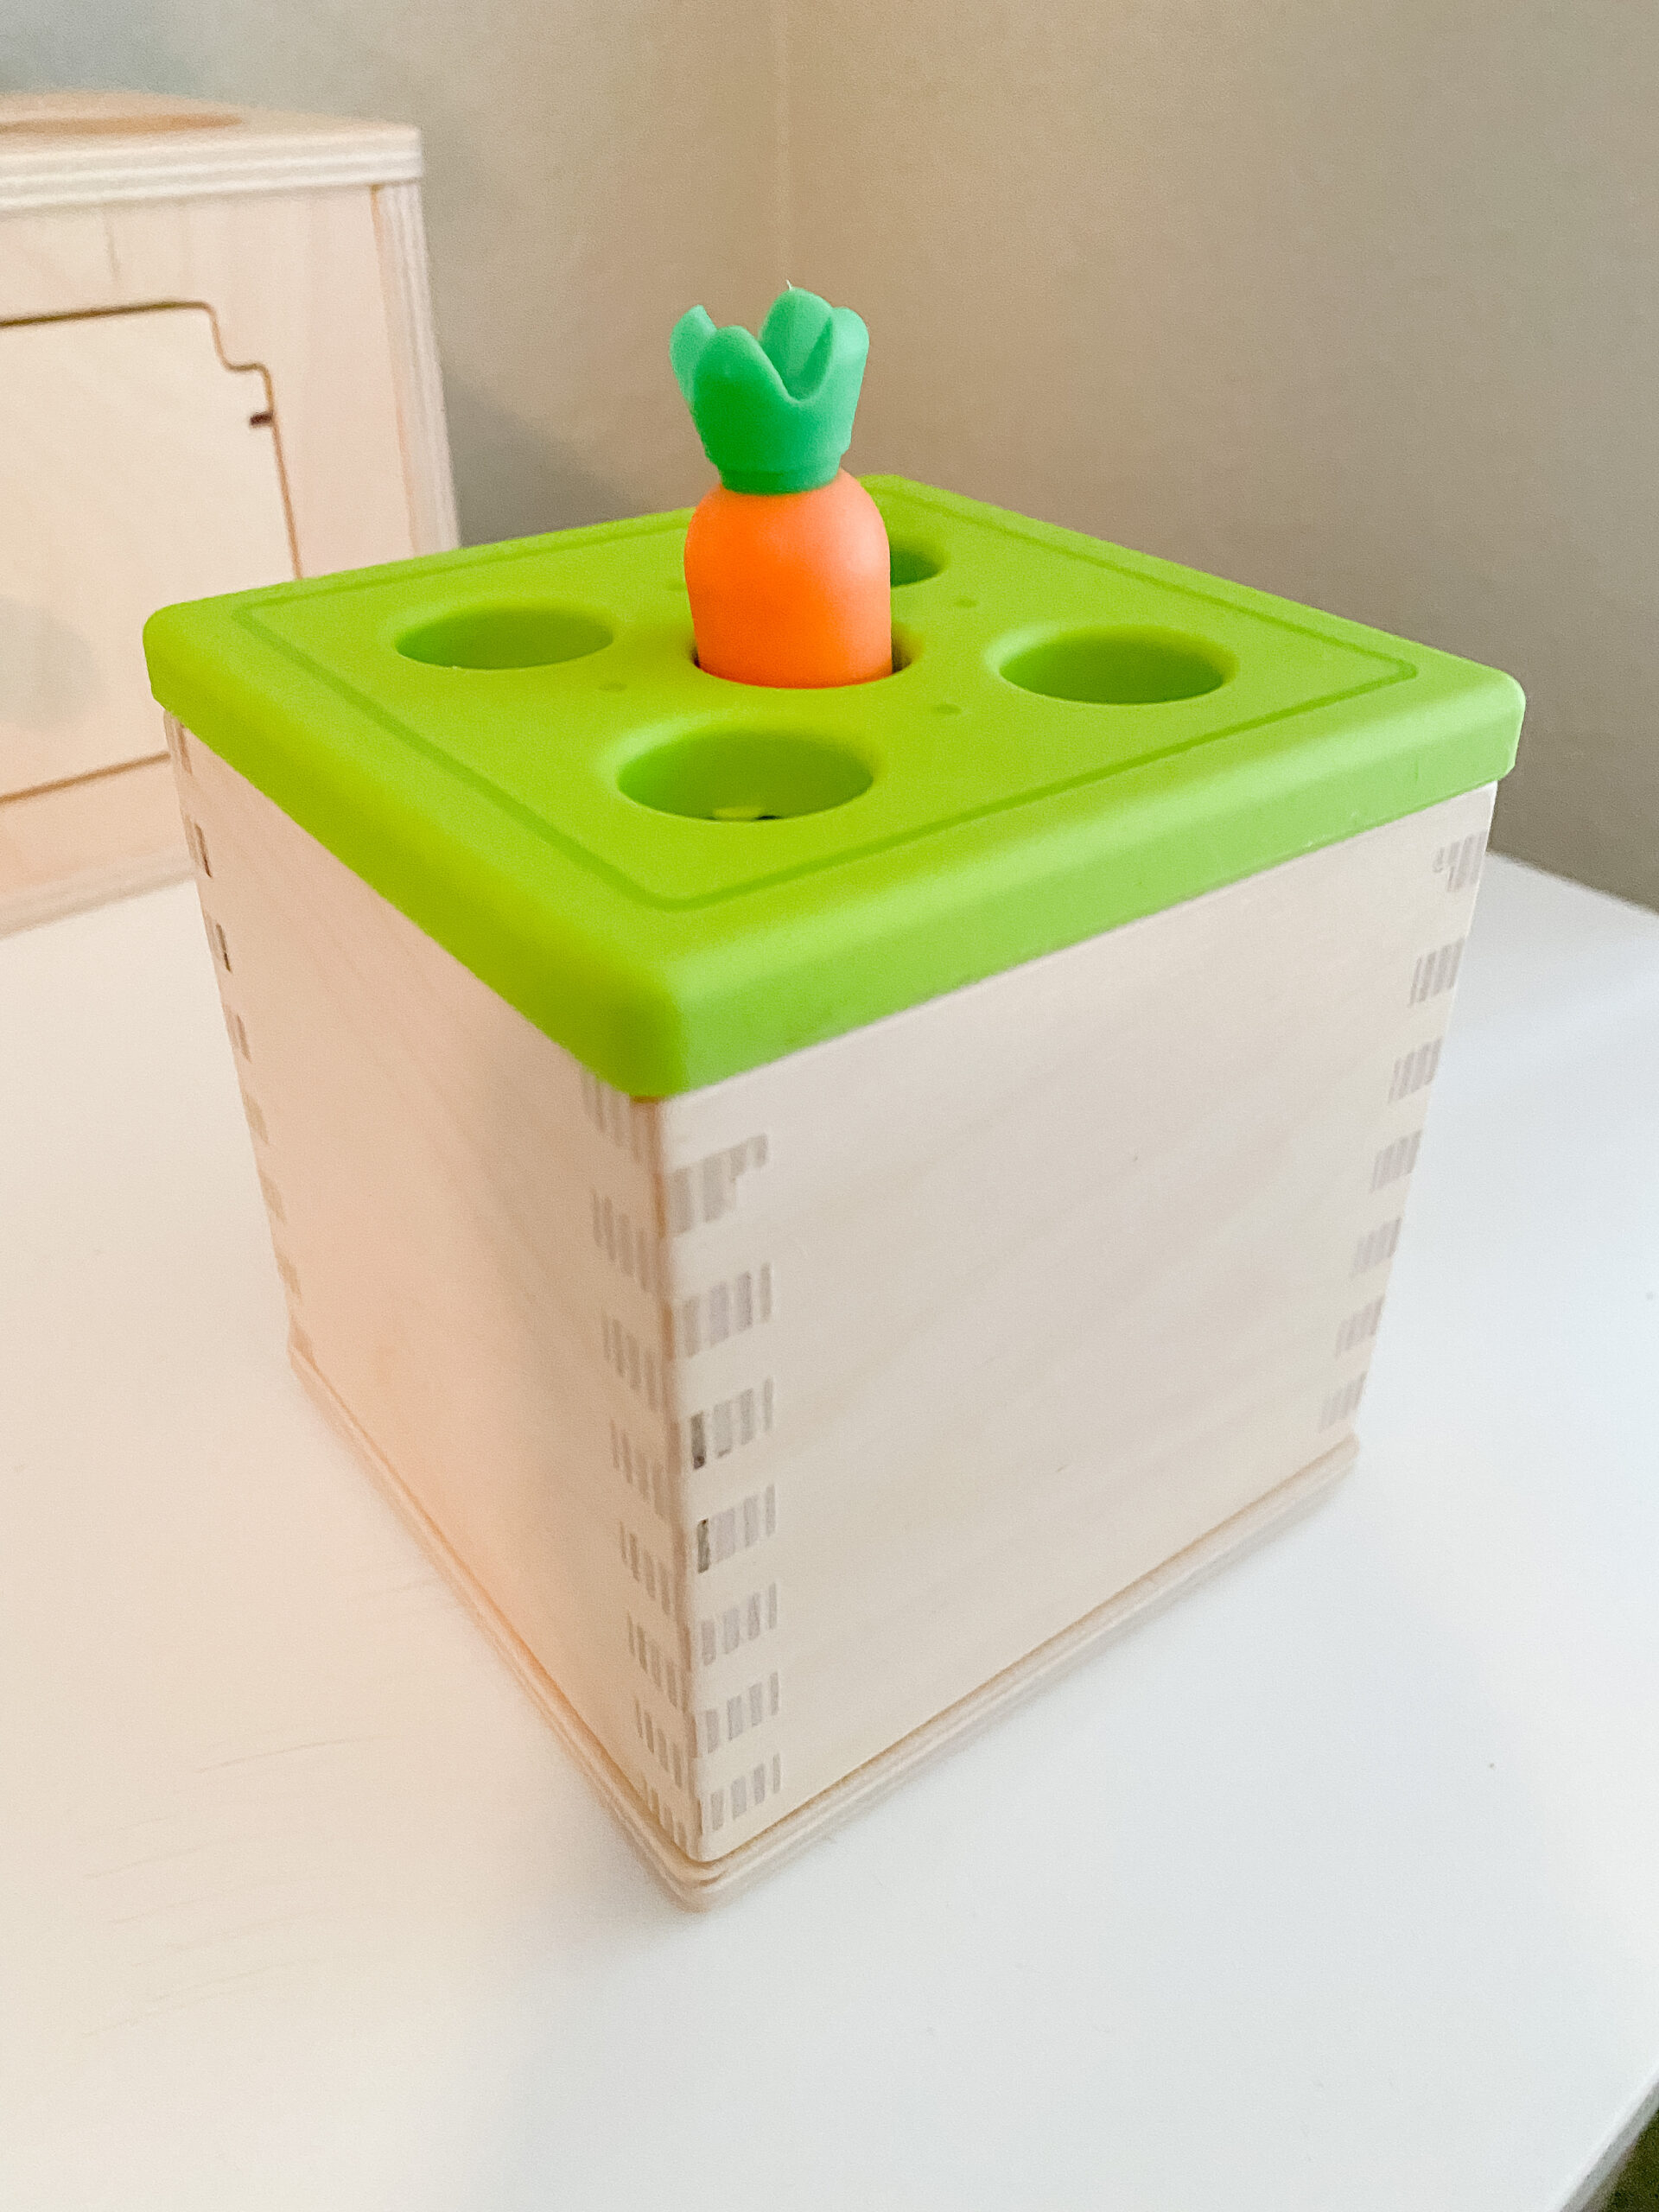 Photo shows a wooden baby toy with a green top and a play carrot sticking out of the top.